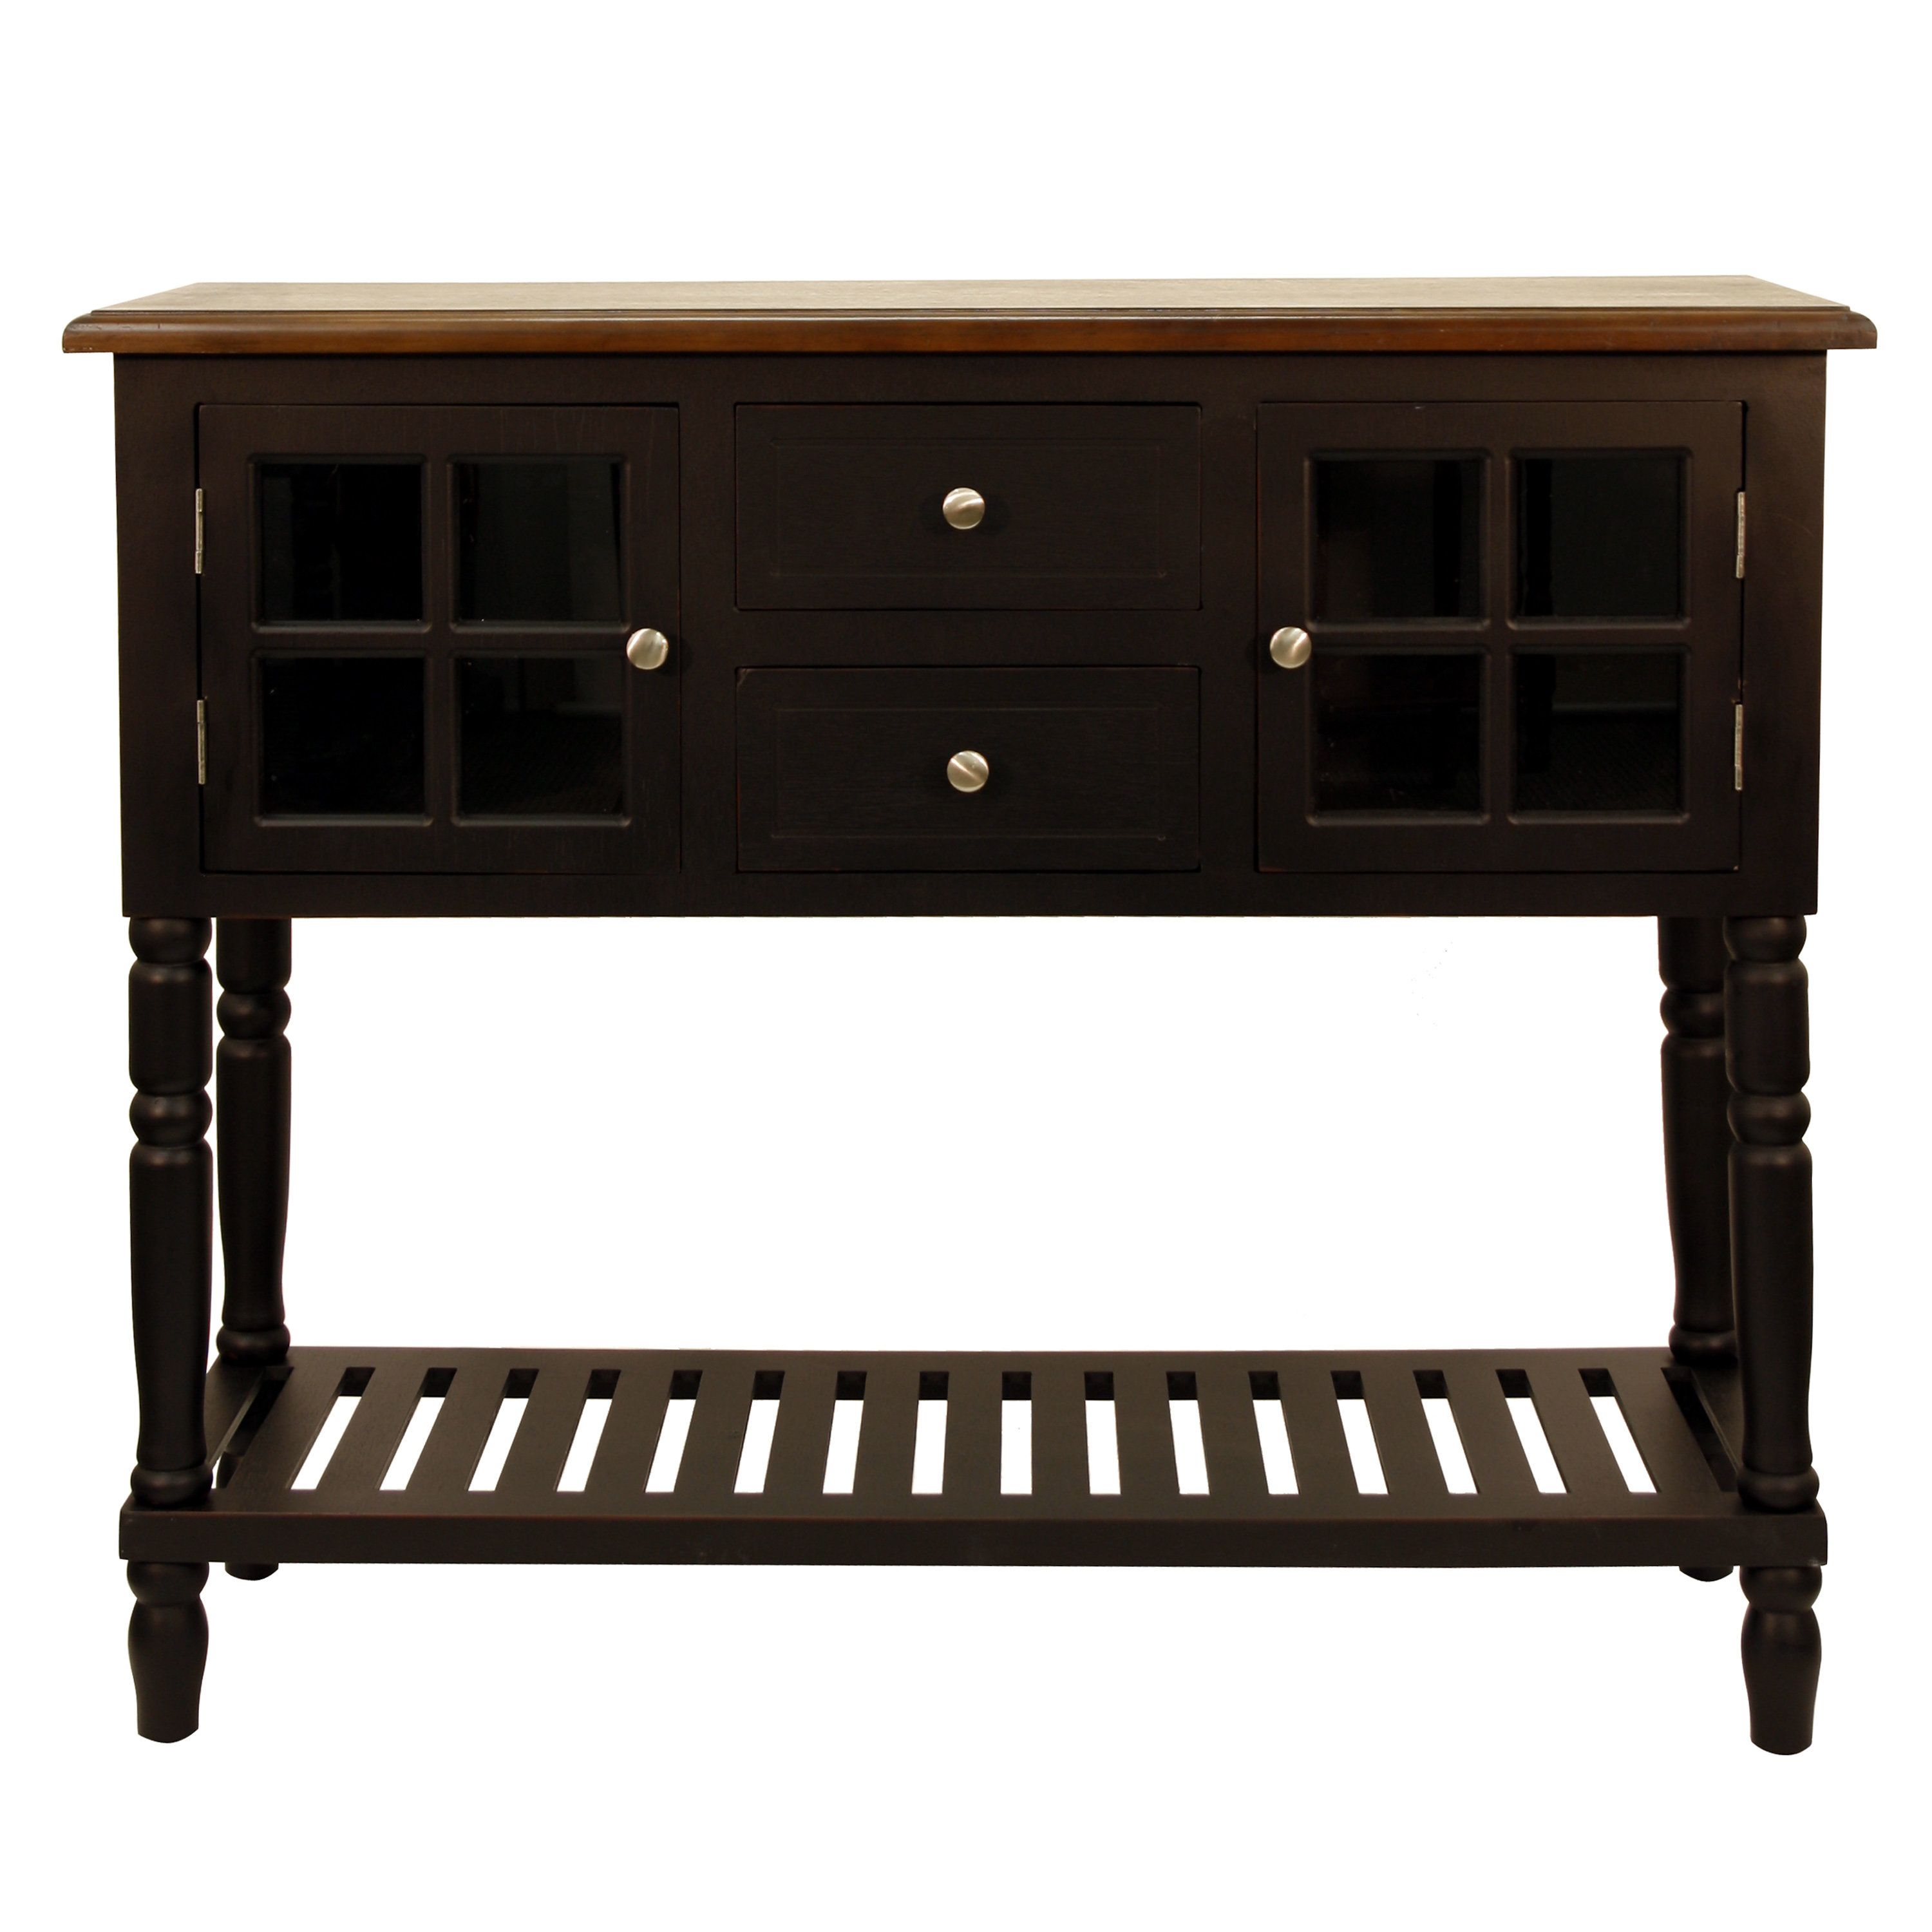 Black Console Tables You'll Love | Wayfair In Ventana Display Console Tables (View 21 of 30)